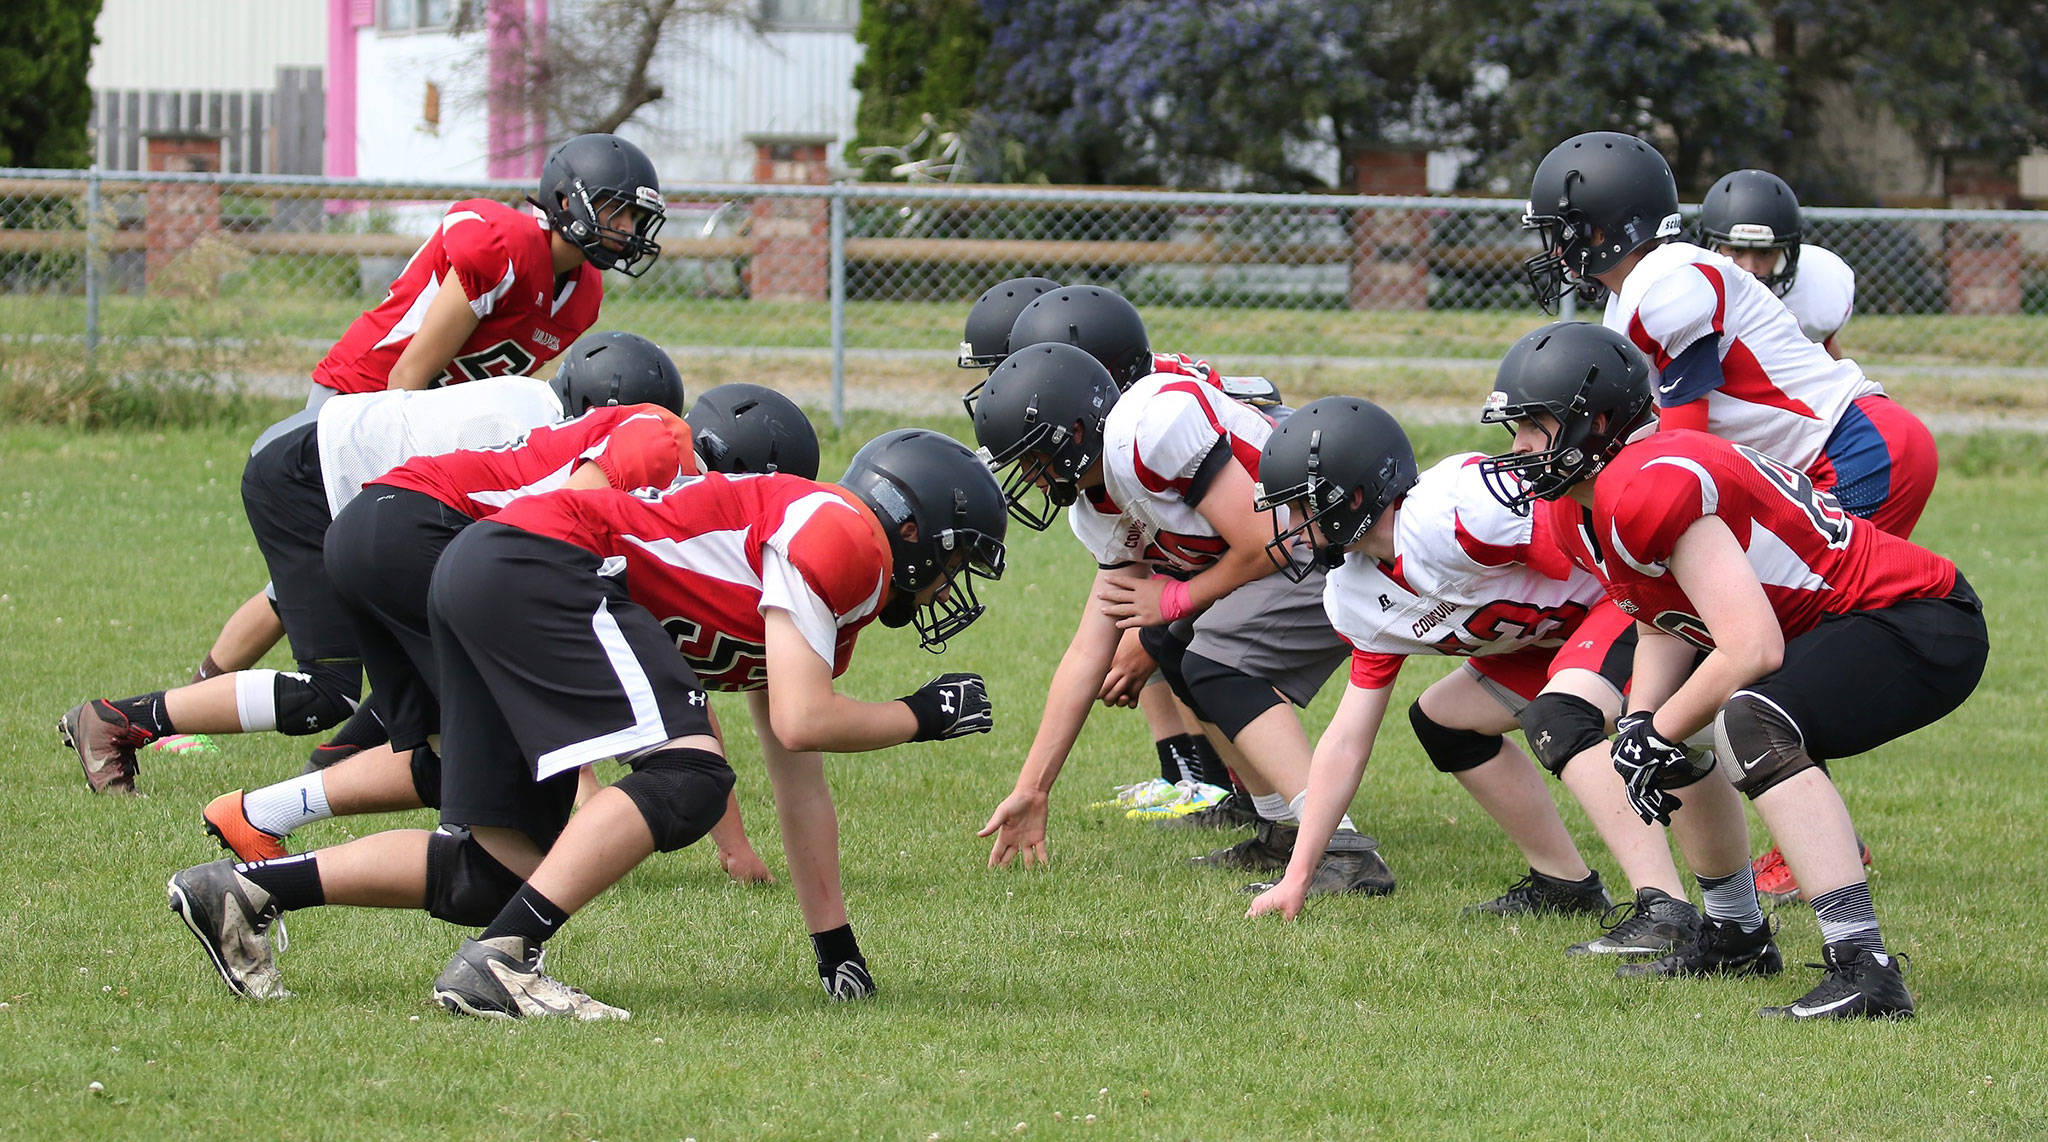 Wildcats, Wolves hit field for spring camp / Football